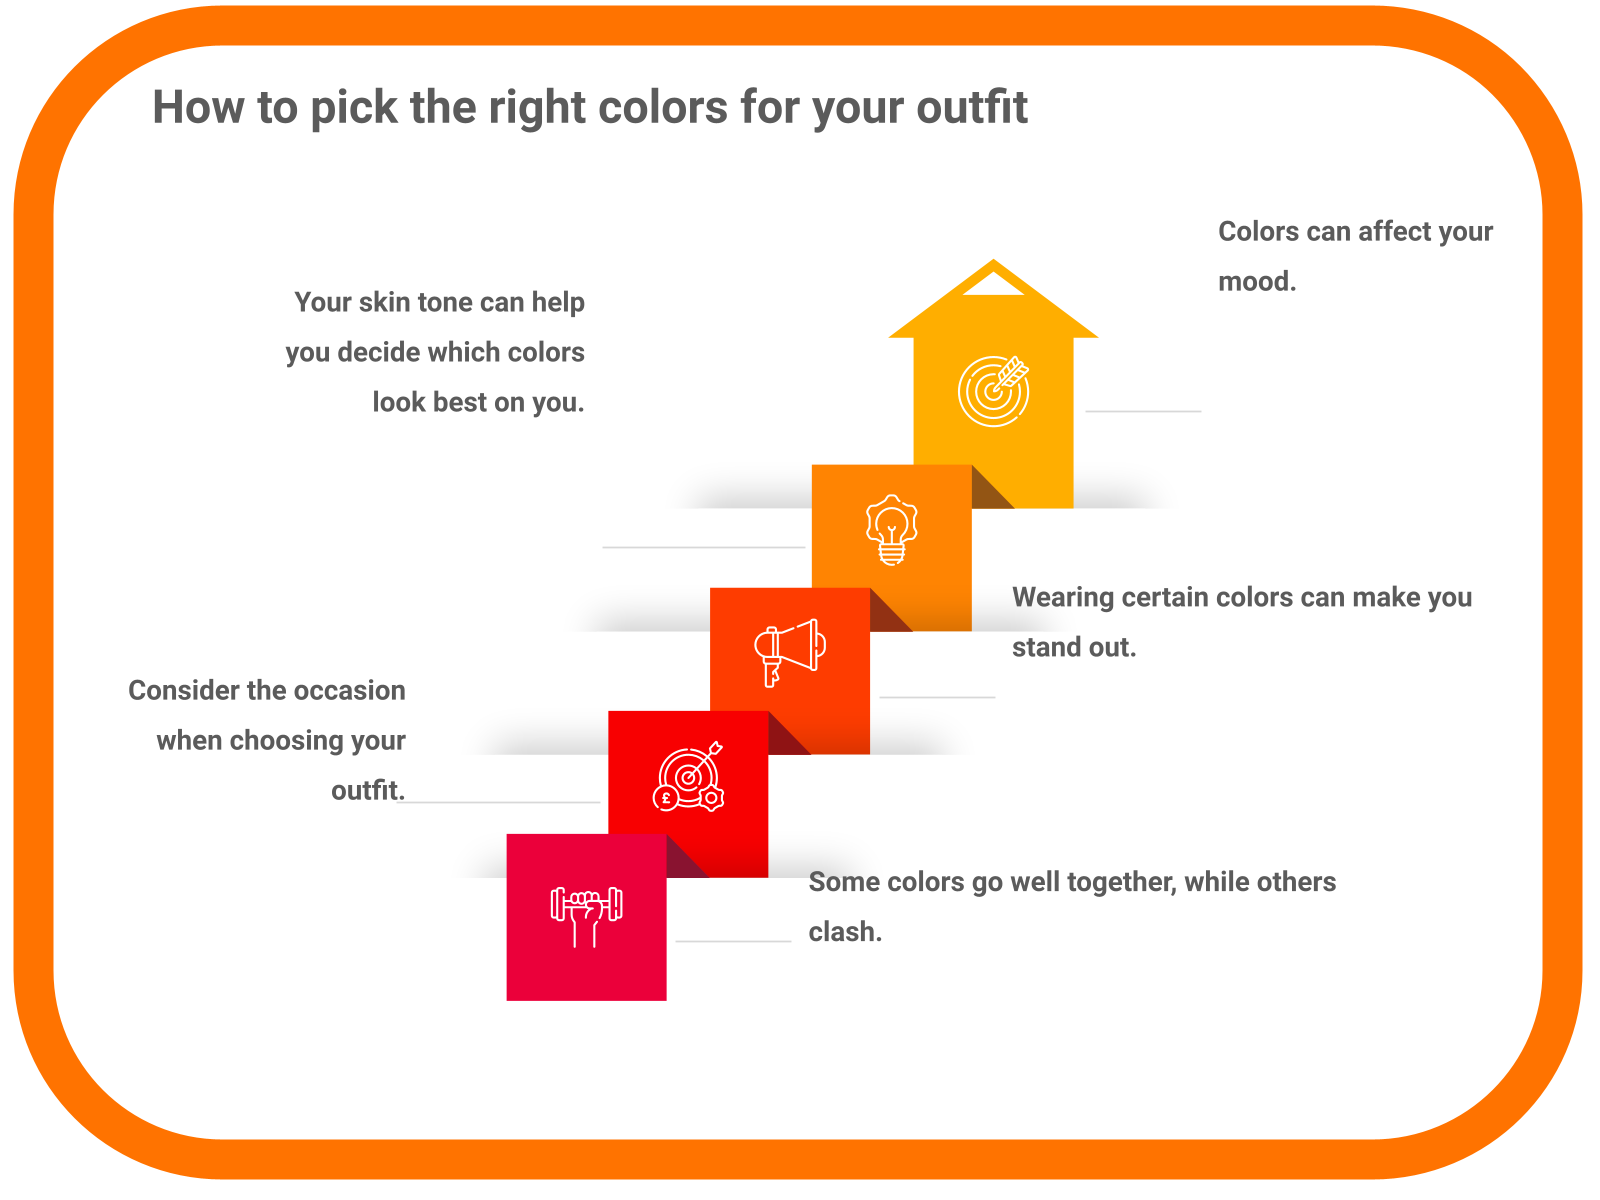 How to pick the right colors for your outfit